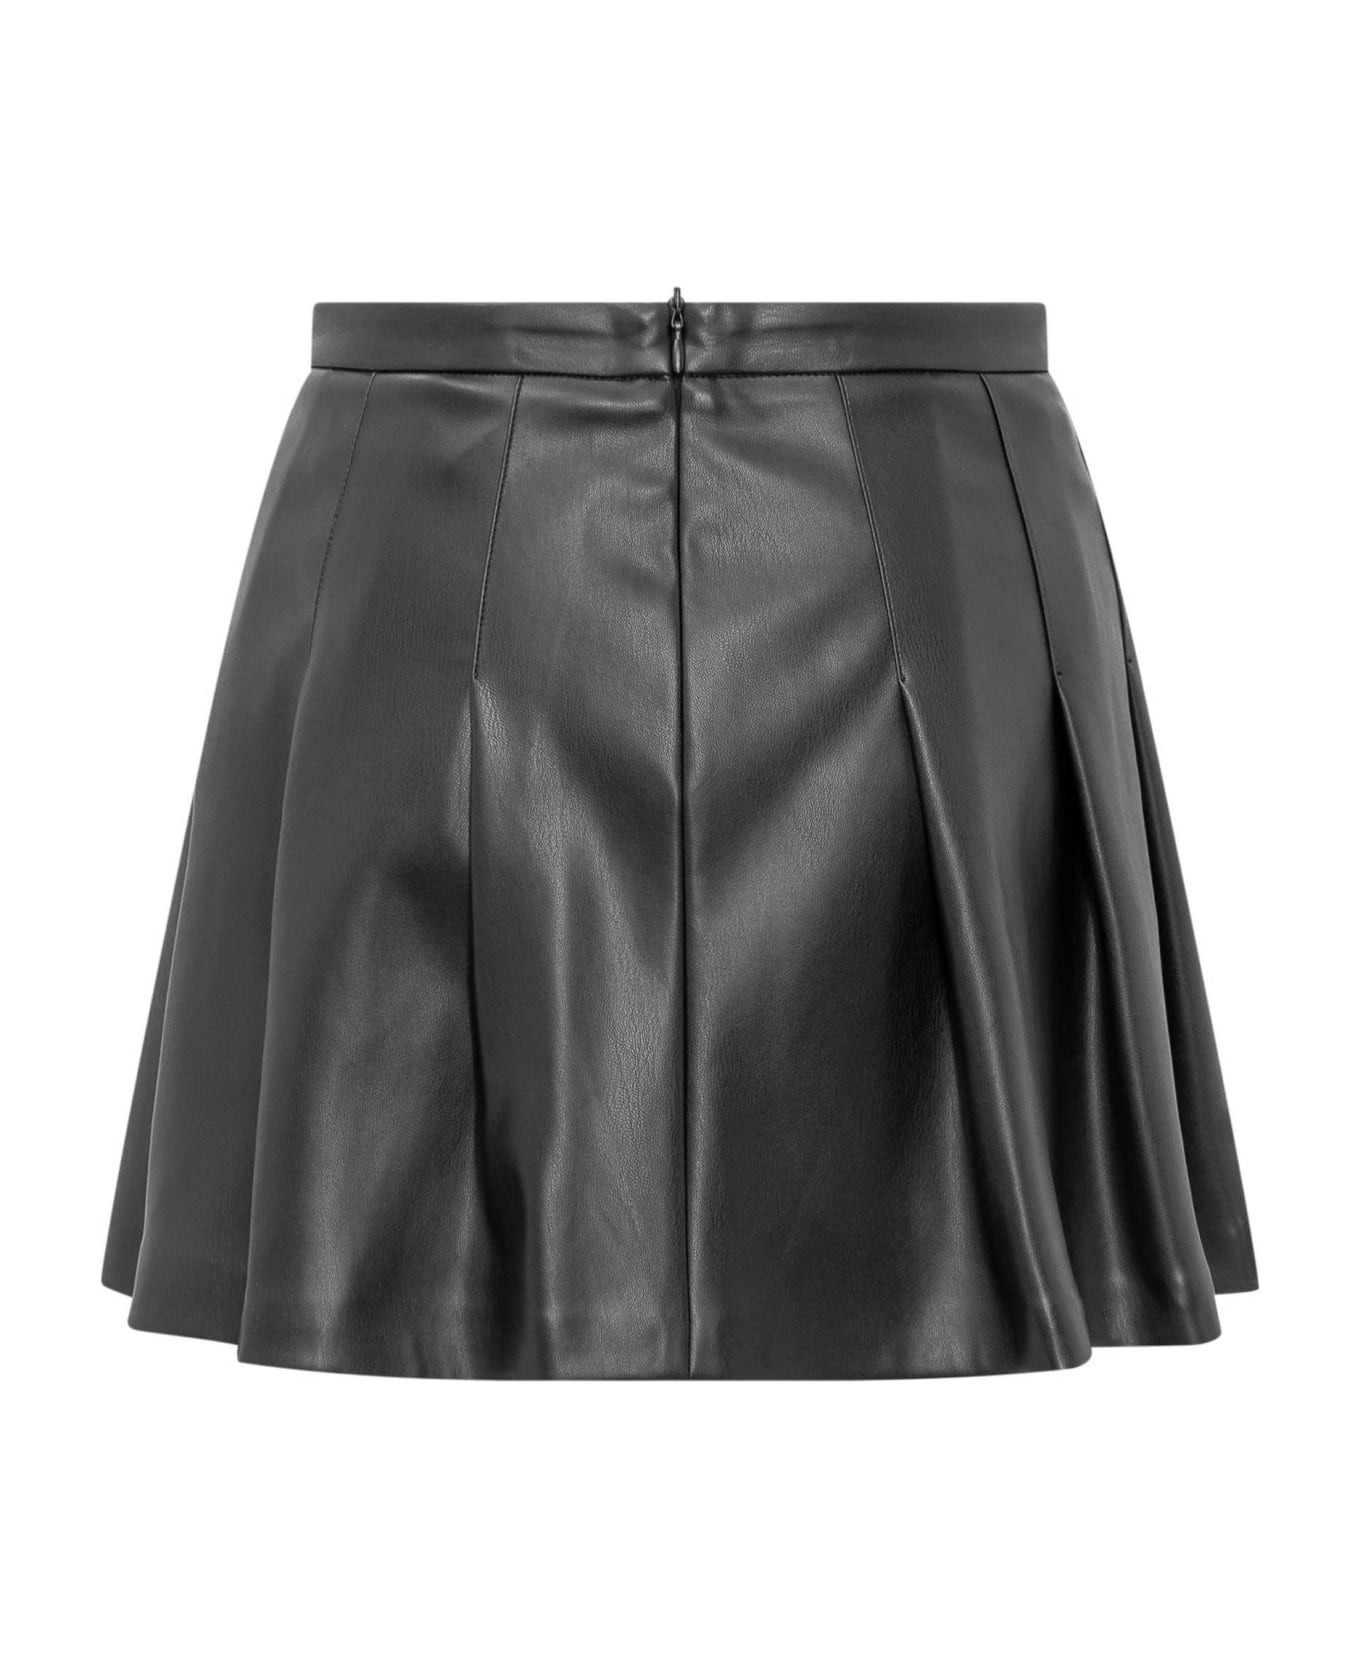 SEMICOUTURE Black Faux Leather Skirt - Black